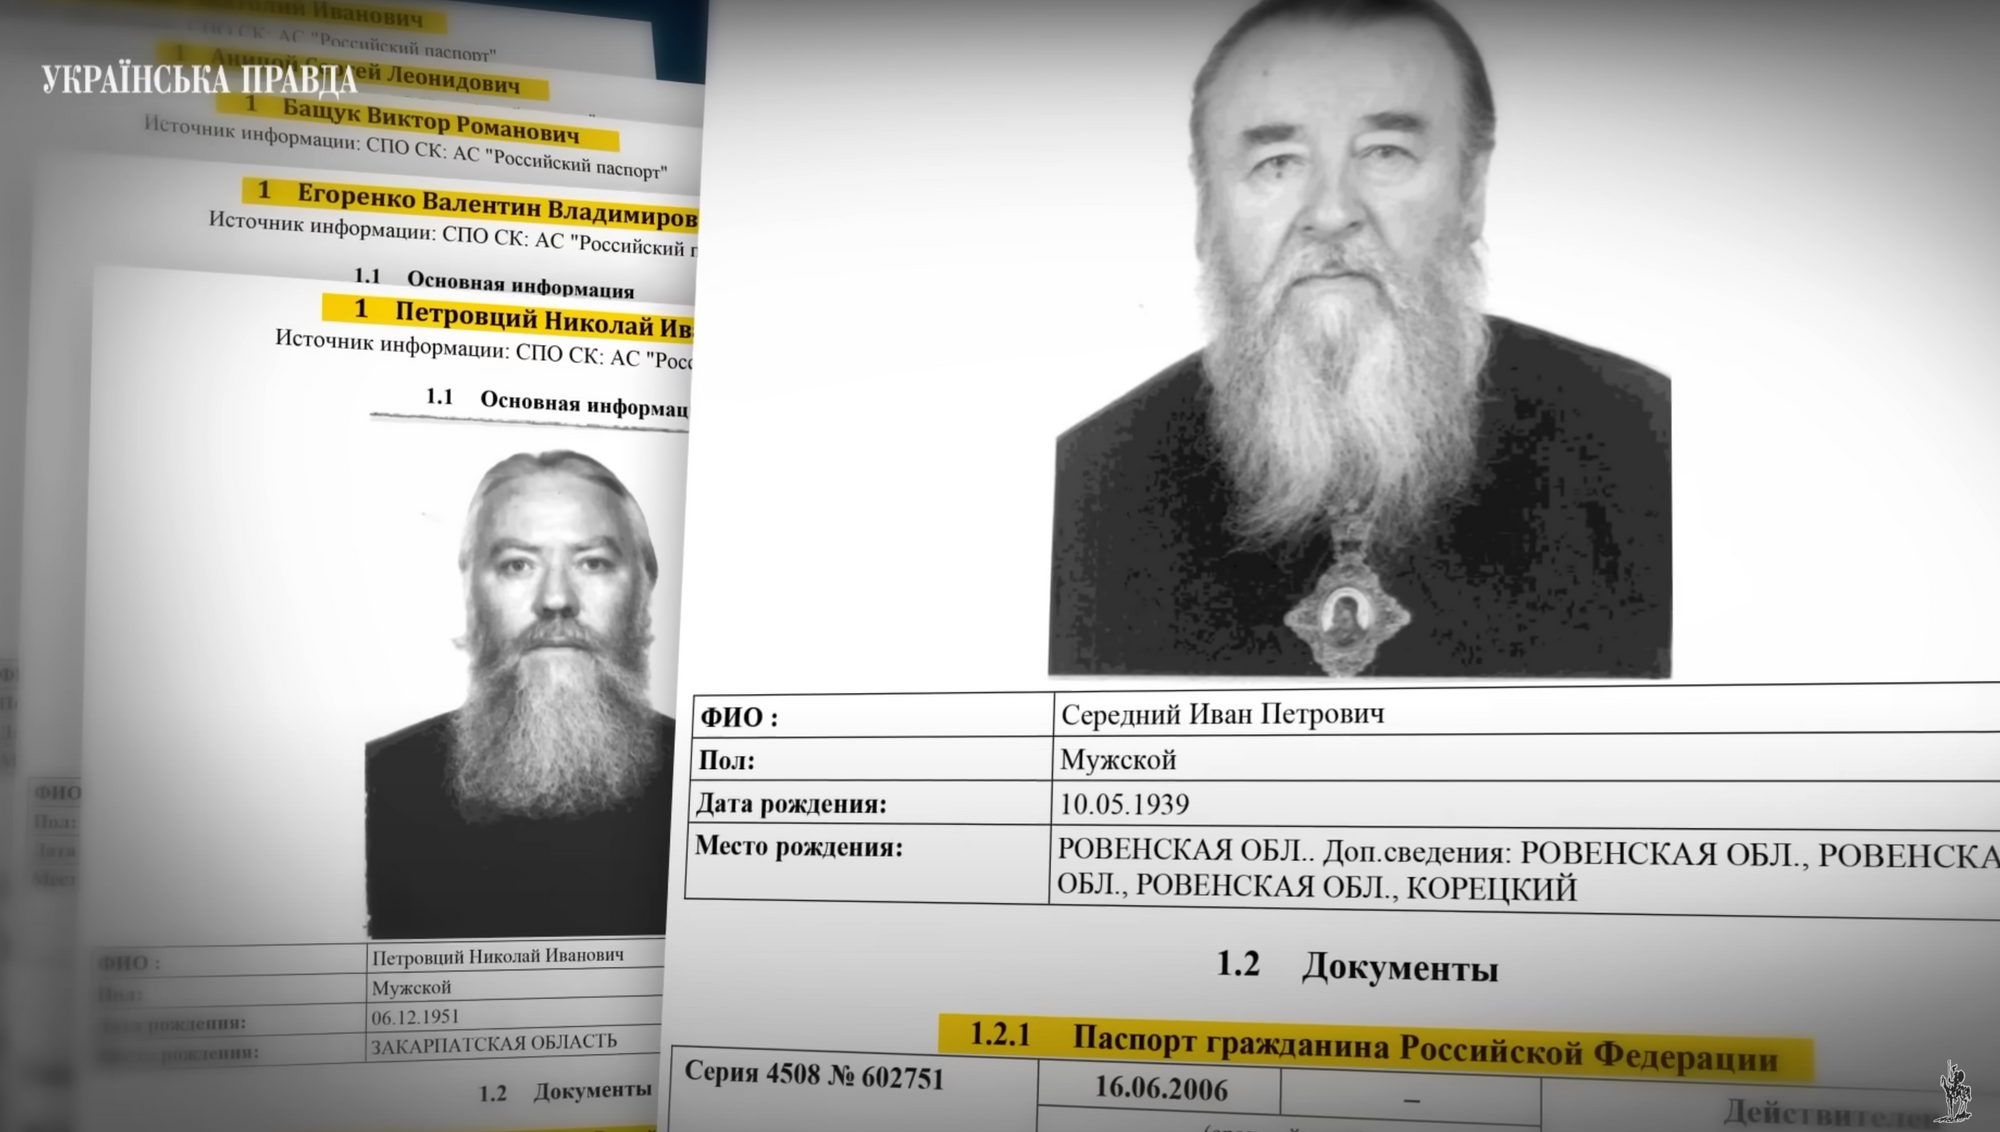 Investigative Stories from Ukraine: At least 20 Ukrainian priests of Moscow-affiliated church hold Russian passports, journalists find